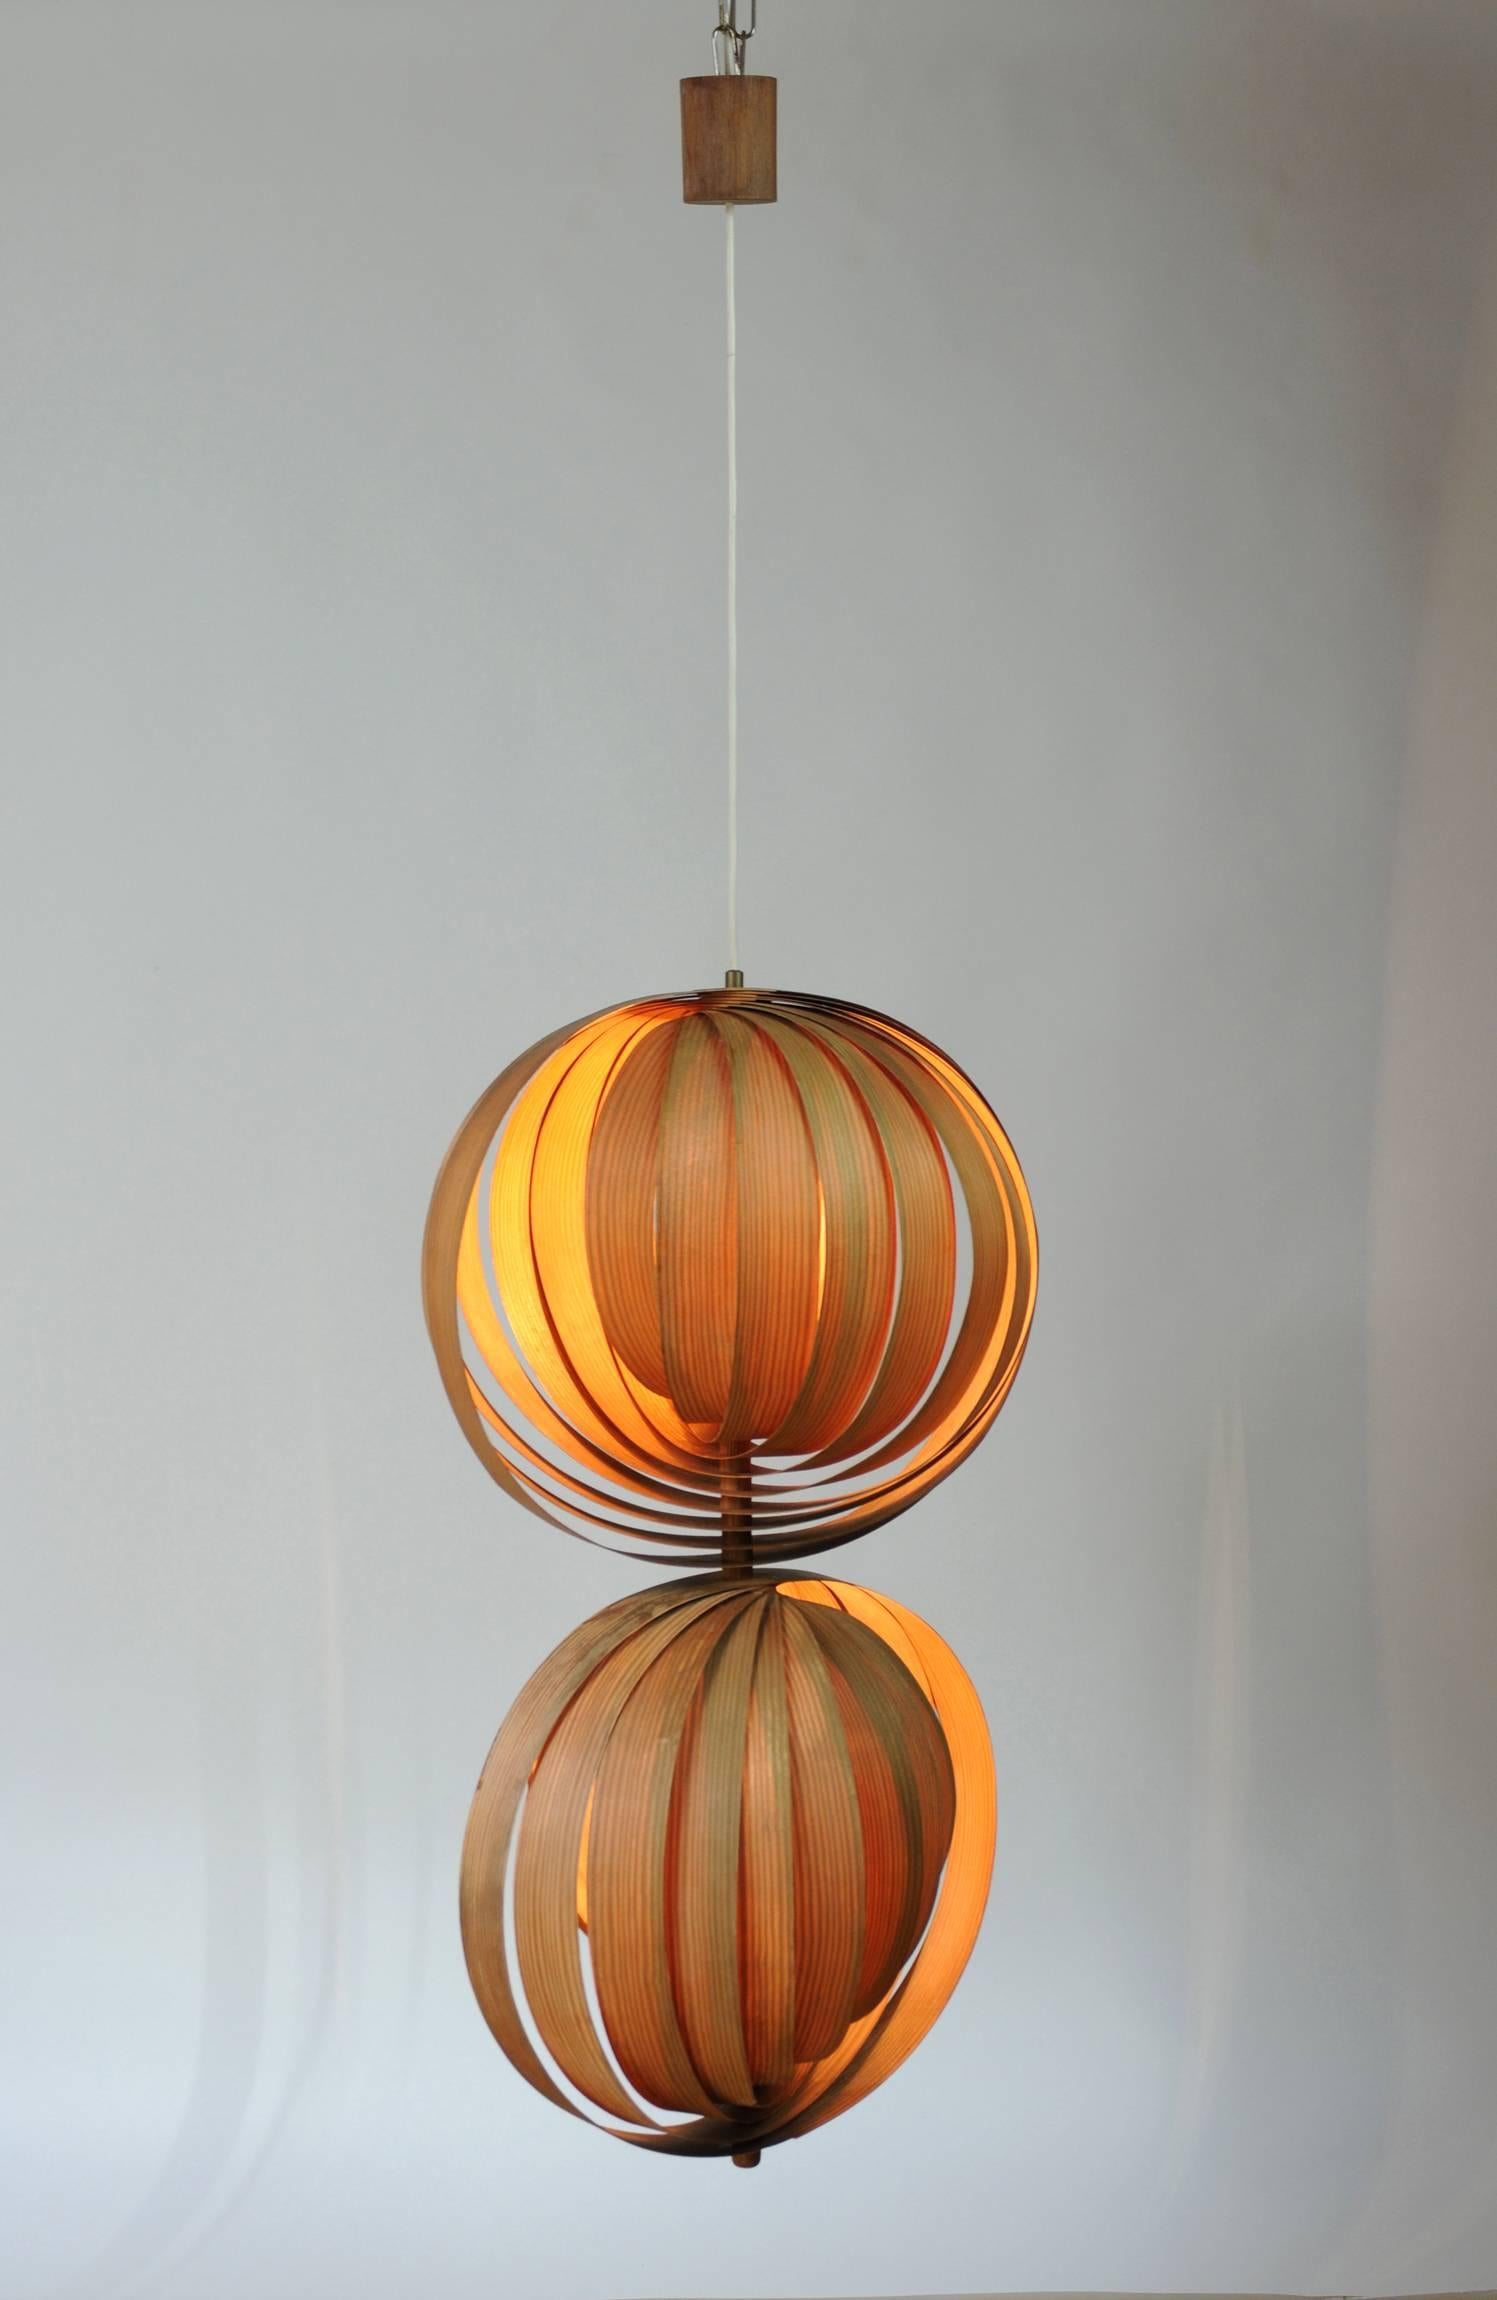 A pendant lamp with two spiral spheres made from pine wood leaves and designed by Hans Agne Jakobsson for Markaryd, Sweden during the 1960s. The spheres are centered around chromed steel circles. The spacing of the leaves can be adjusted at will.